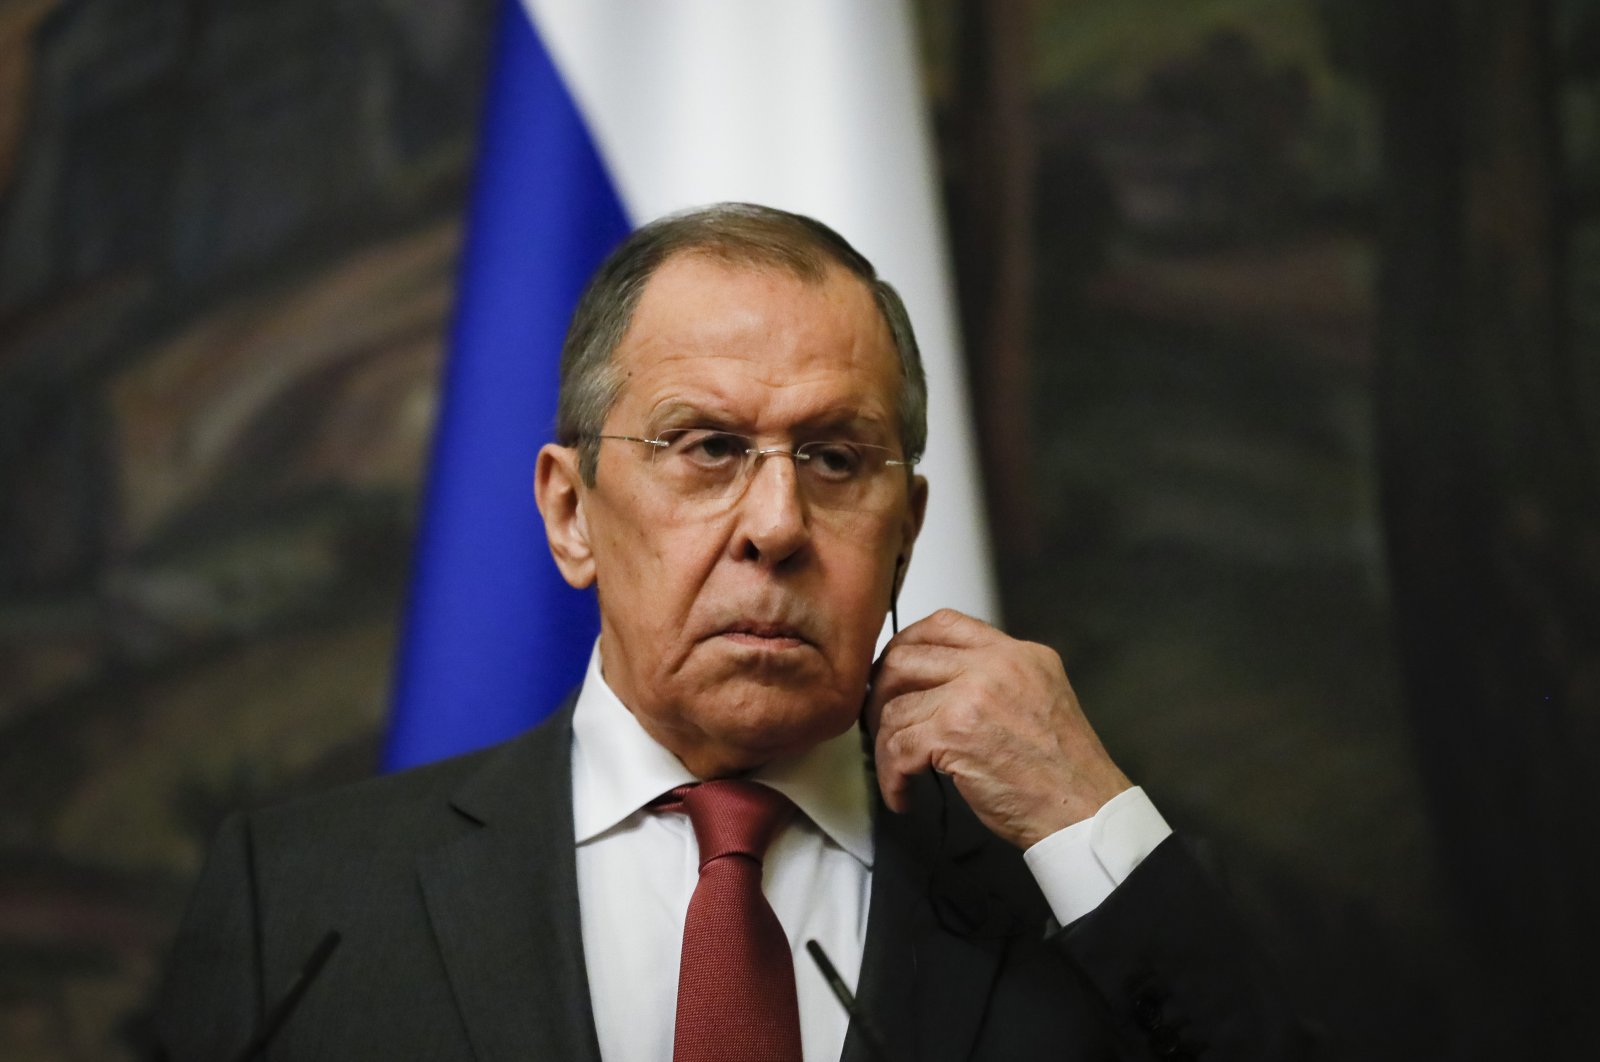 Russian Foreign Minister Sergey Lavrov addresses a joint news conference with his Iranian counterpart (not pictured) in Moscow, Russia, March 29, 2023. (EPA Photo)